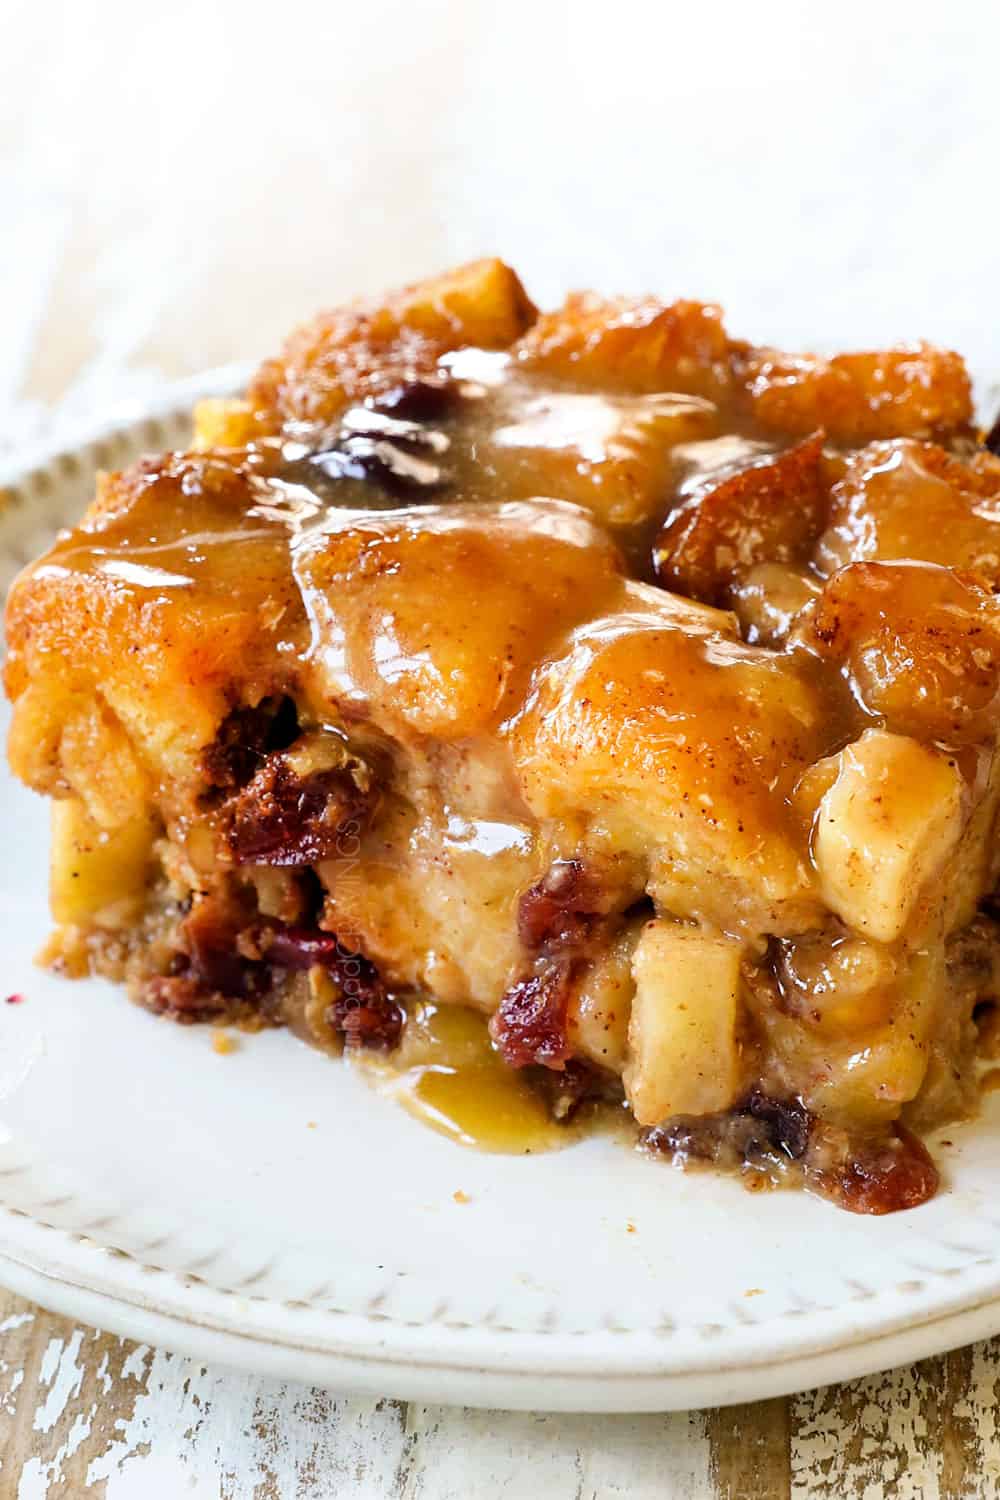 Apple Bread Pudding + Video (Make Ahead Instructions)